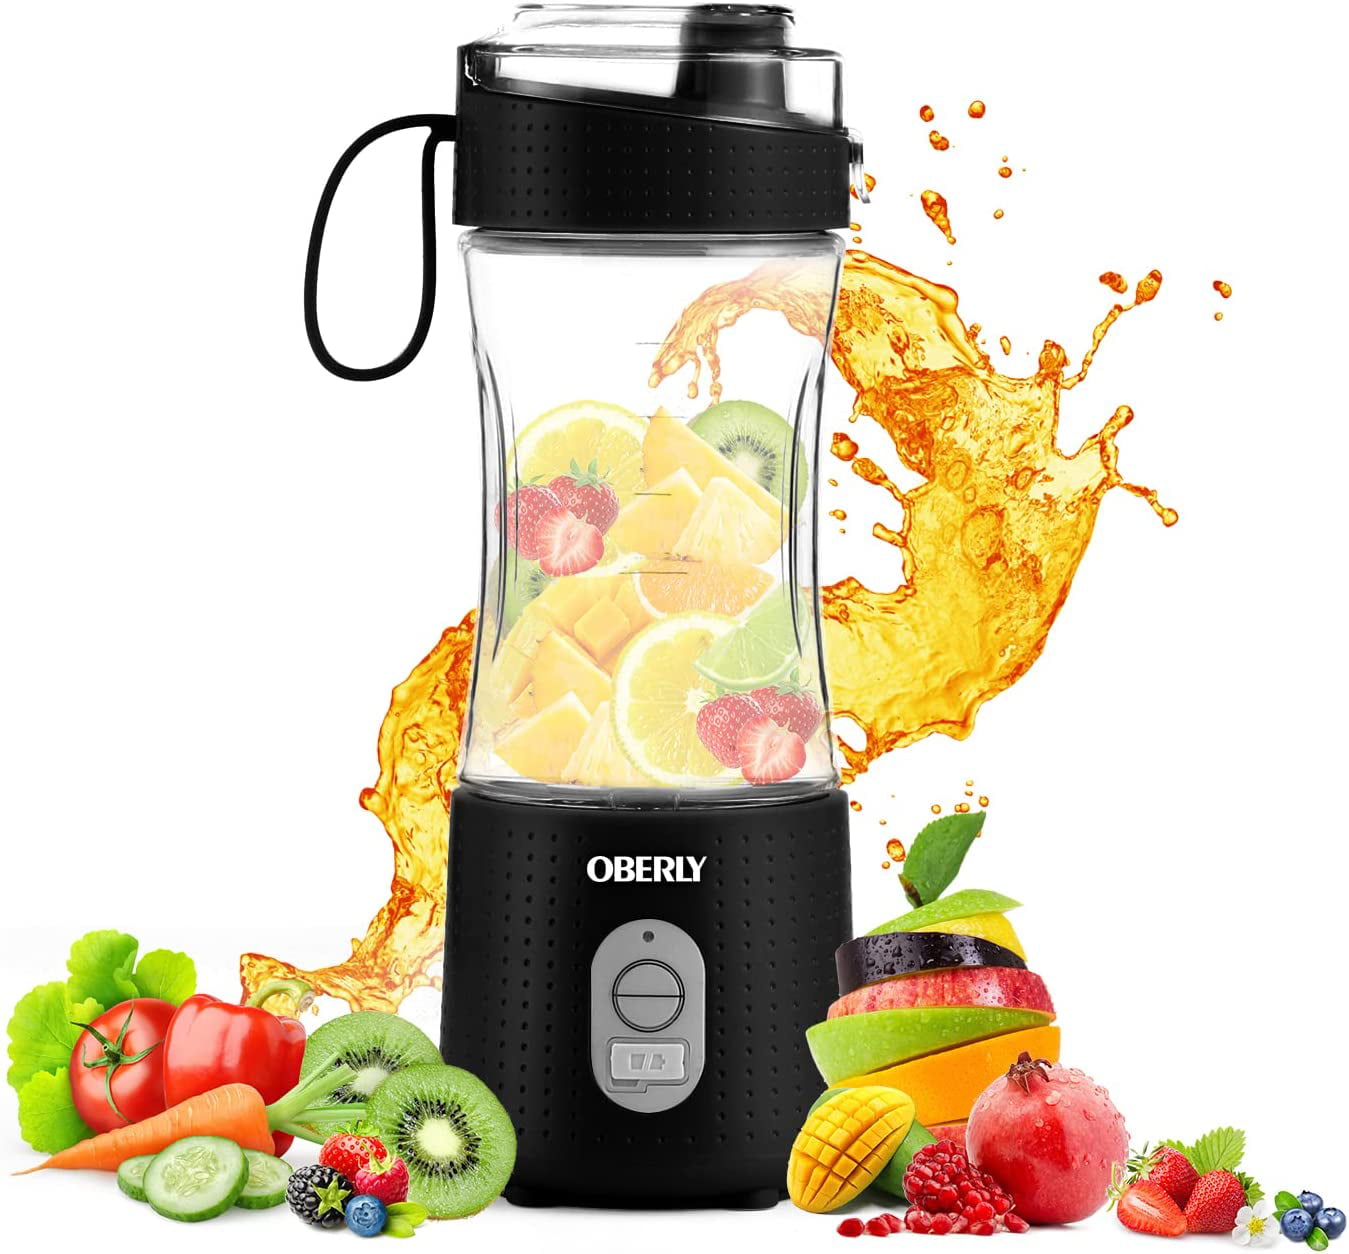 Best Portable Blender for Shakes and Smoothies, Upgraded Personal Protein with USB Rechargeable, Crush Ice, Fruit and Drinks, 13oz Mini Travel Cup - Walmart.com